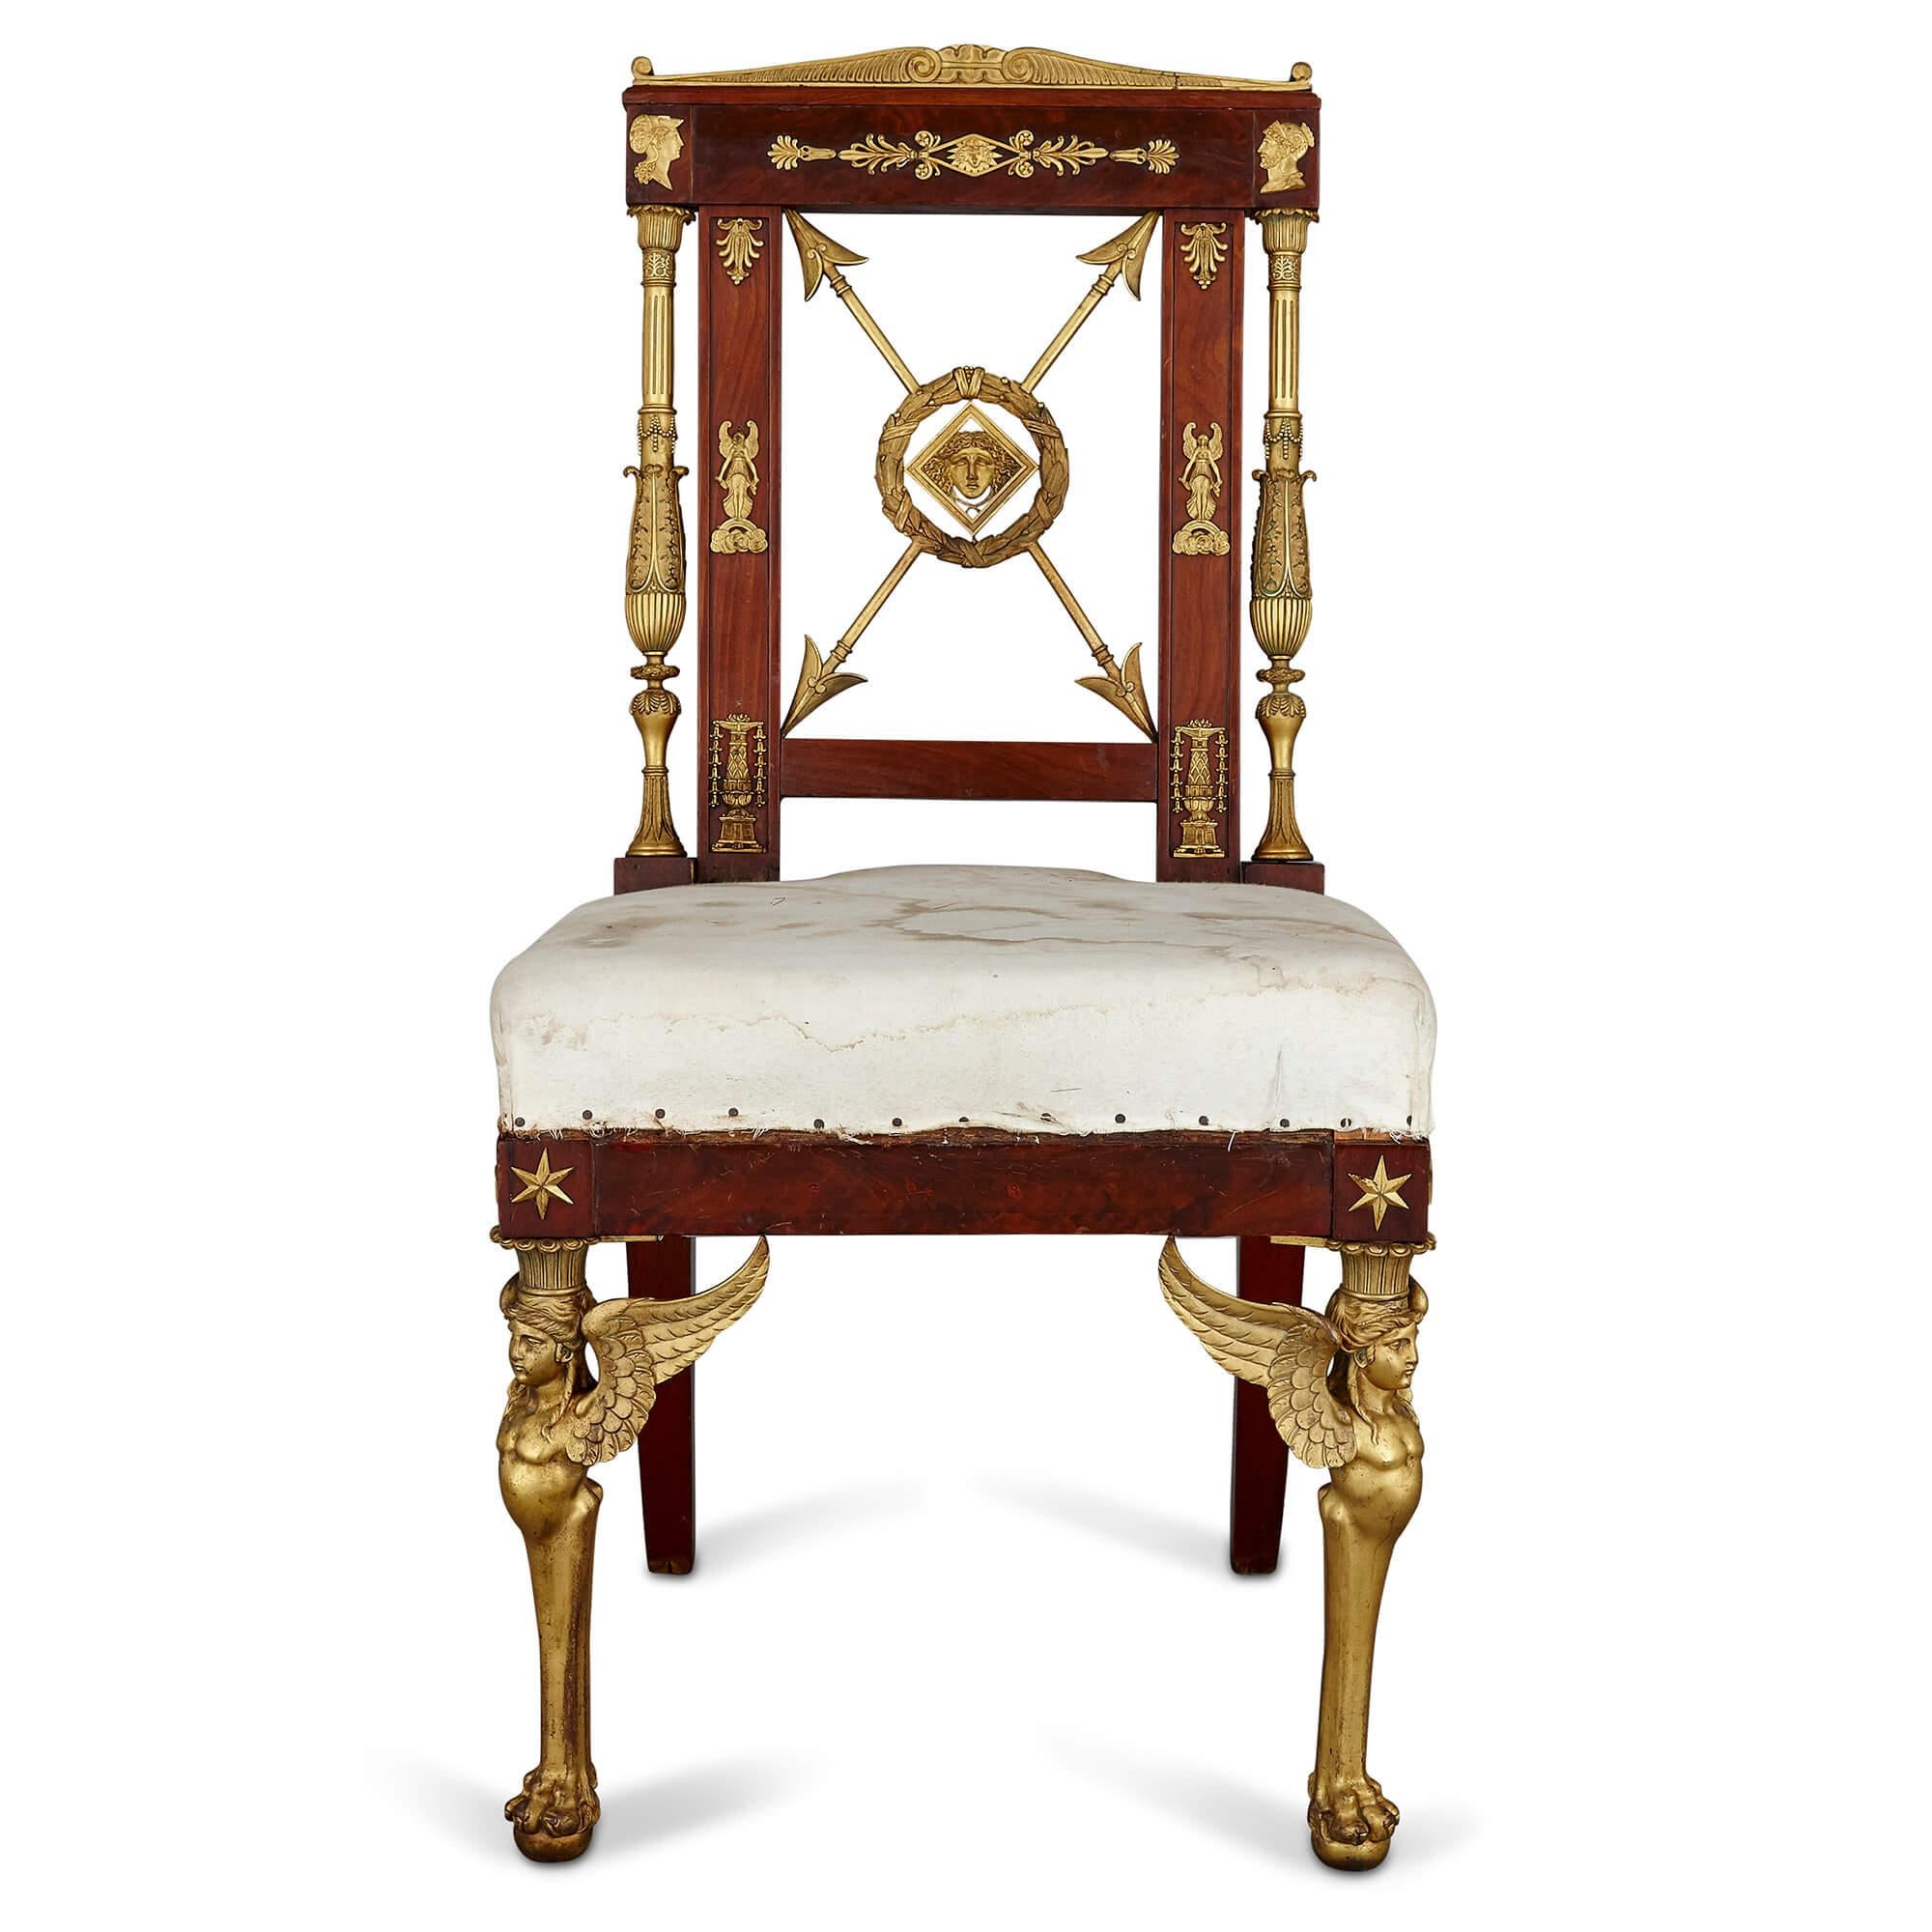 Empire style mahogany and gilt bronze side chair
French, late 19th century
Measures: Height 94cm, width 52cm, depth 52cm

Crafted from mahogany, this unusual side chair is mounted throughout with Empire style gilt bronze mounts, referencing both